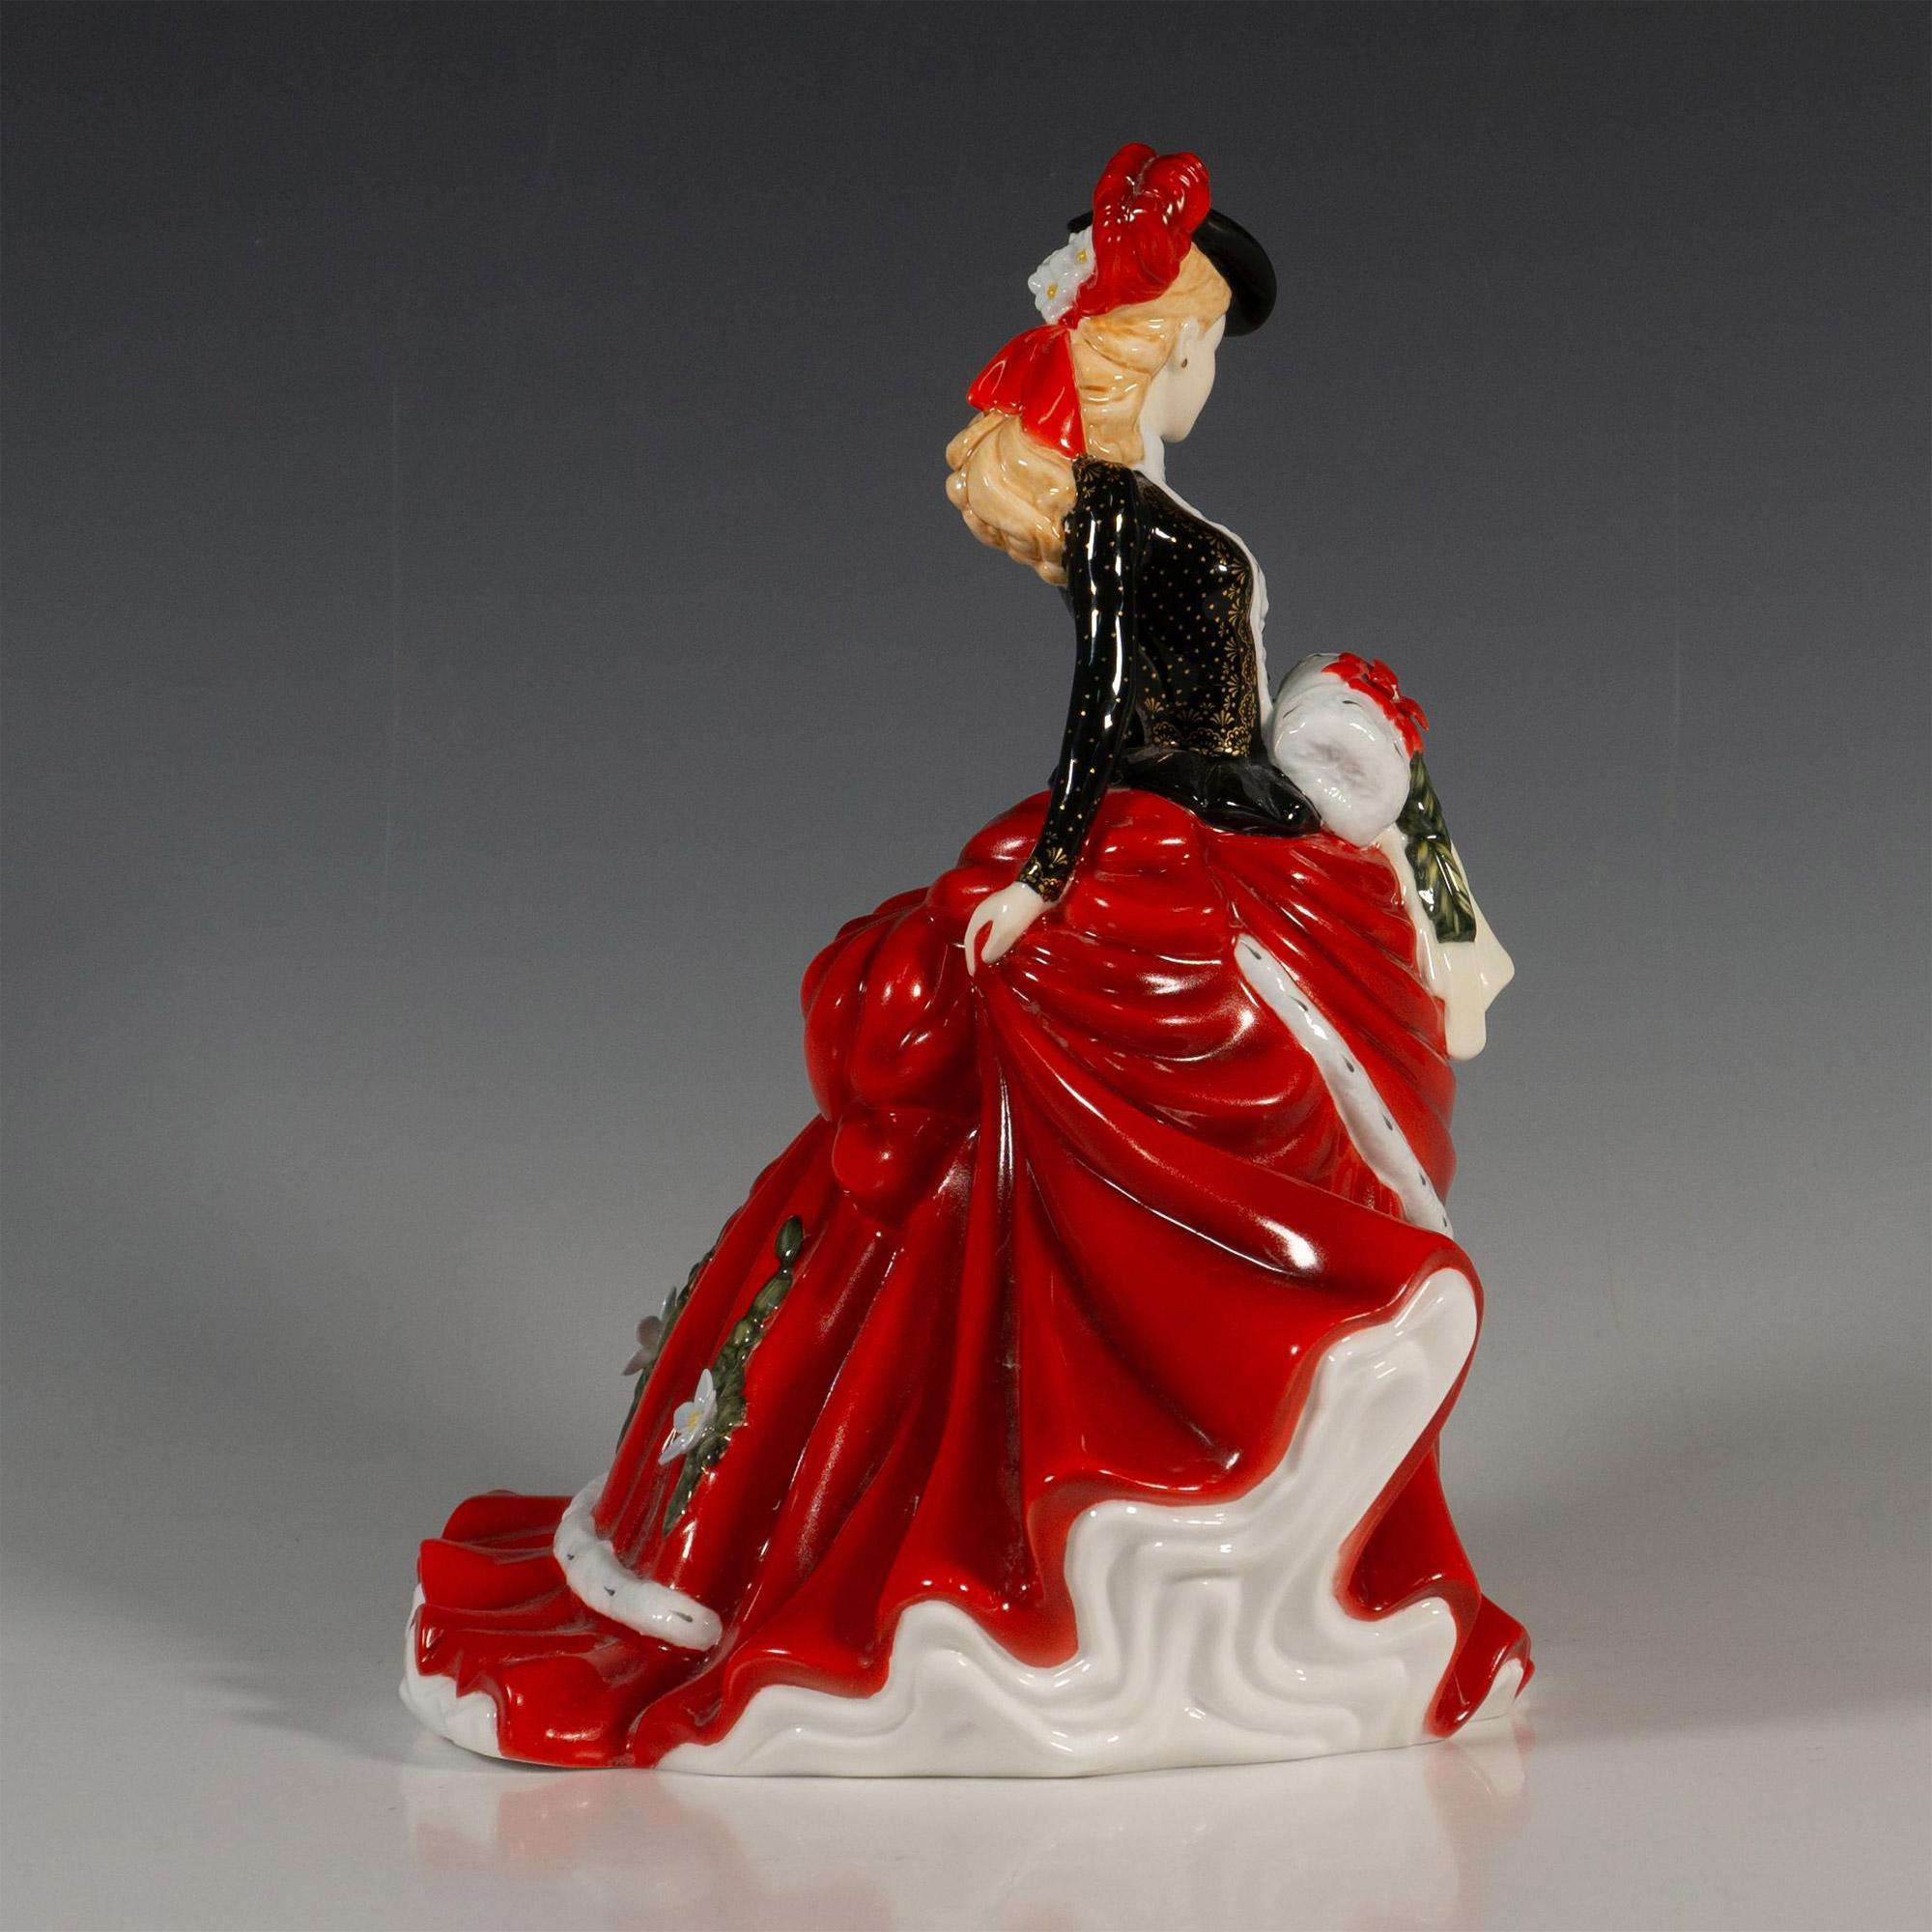 Holly HN5846 - Royal Doulton Figurine - Image 3 of 5